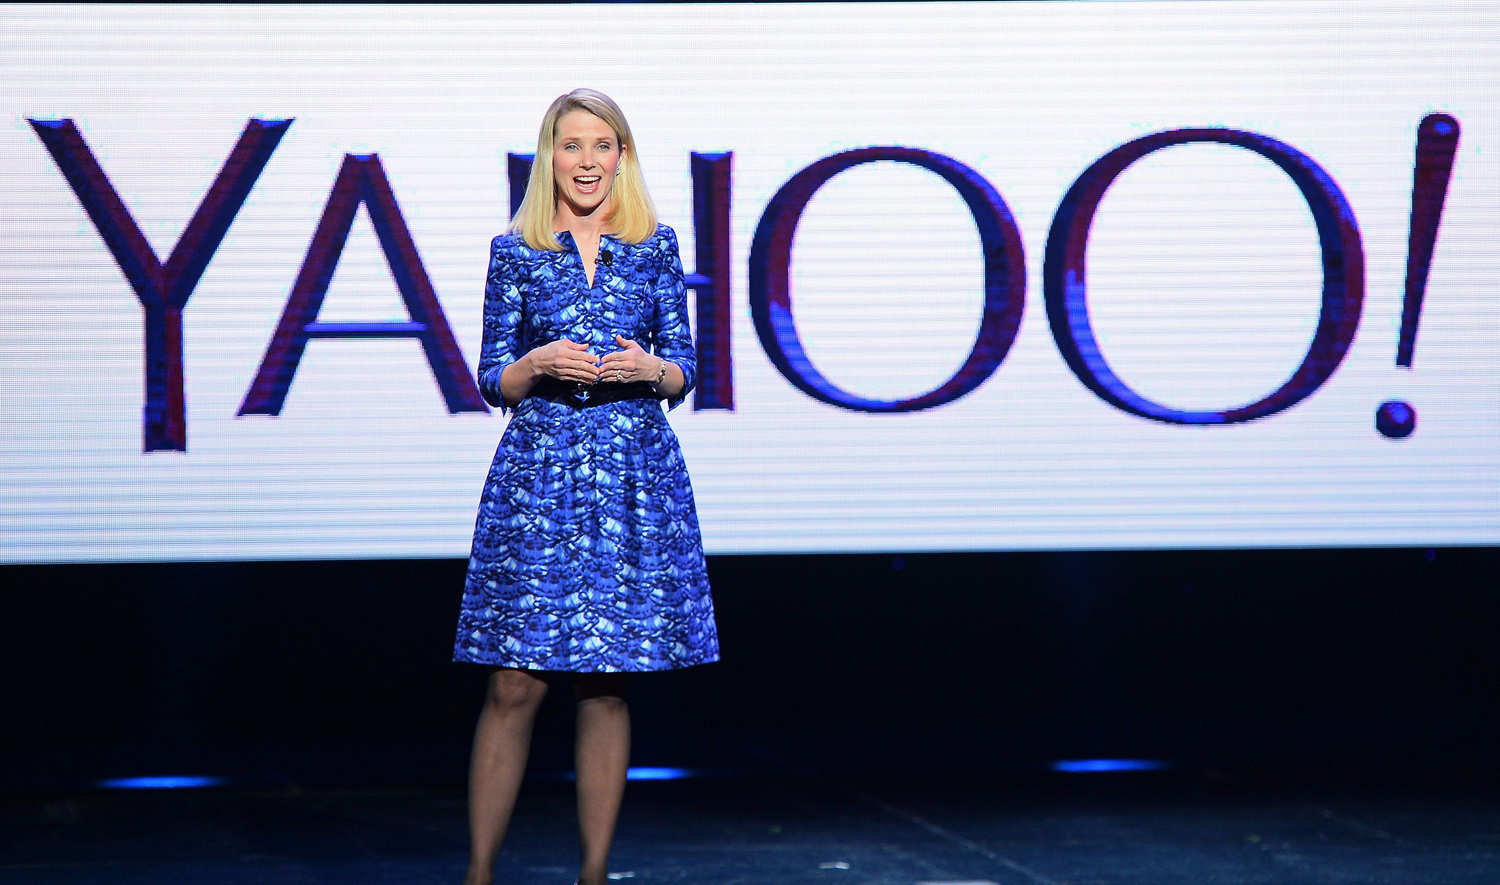 Yahoo! President and CEO Marissa Mayer delivers a keynote address in Las Vegas. Photo: AFP